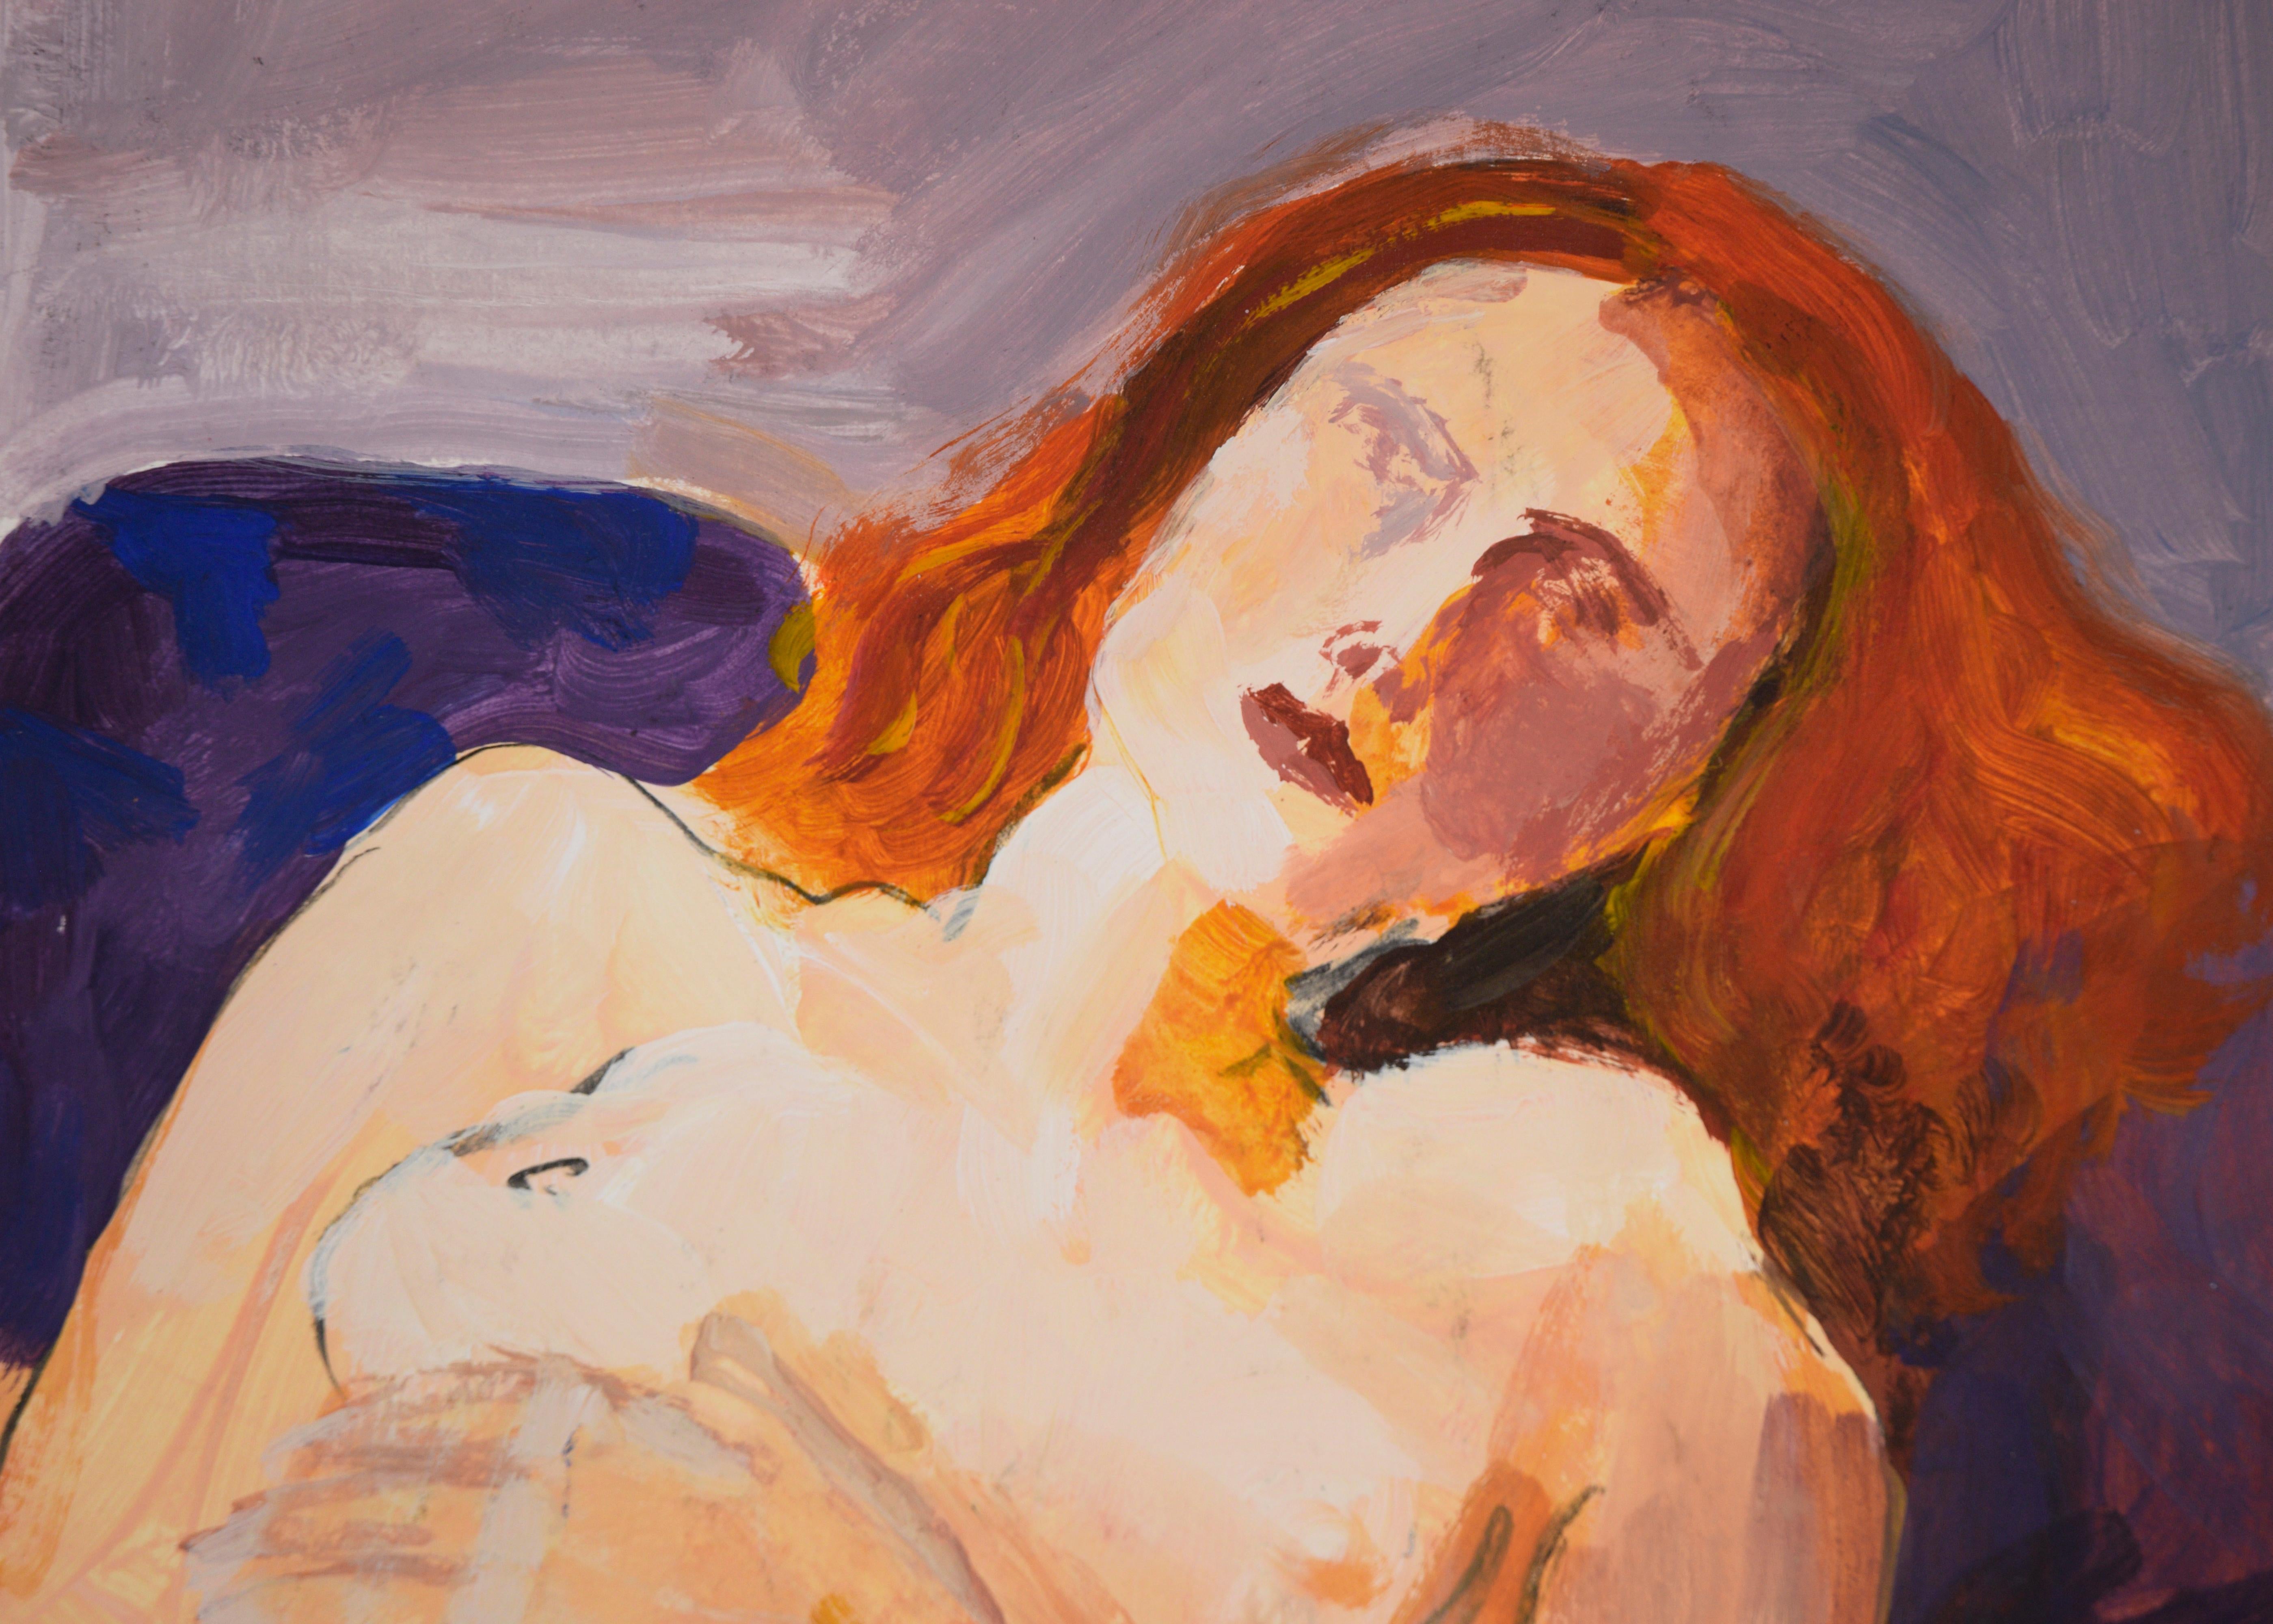 Redhead On A Yellow Blanket - Original San Francisco Abstract - American Impressionist Painting by Katherine Kallick